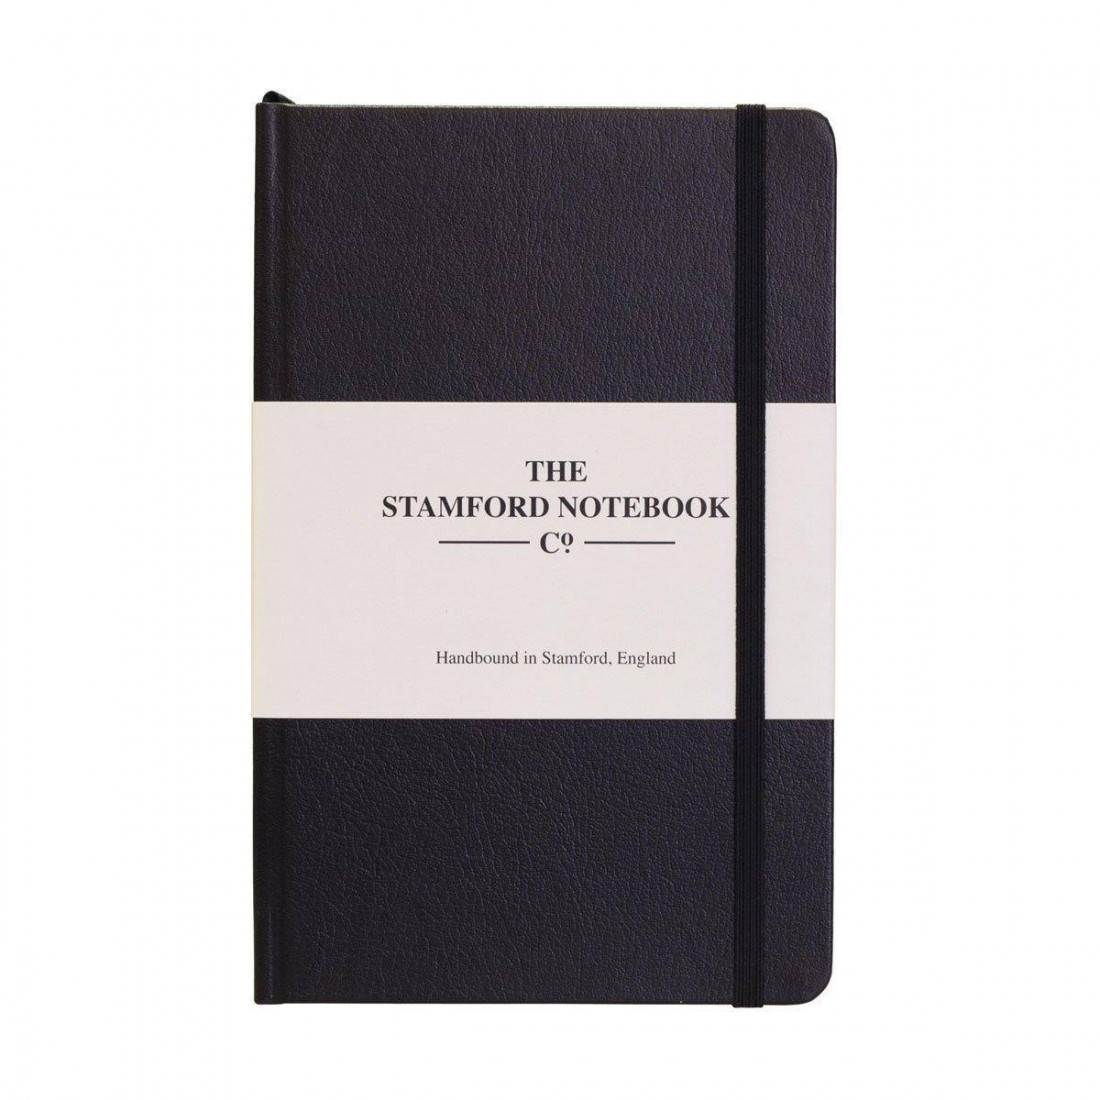 The recycled Leather Notebook Black Large 17x23.5 Stamford